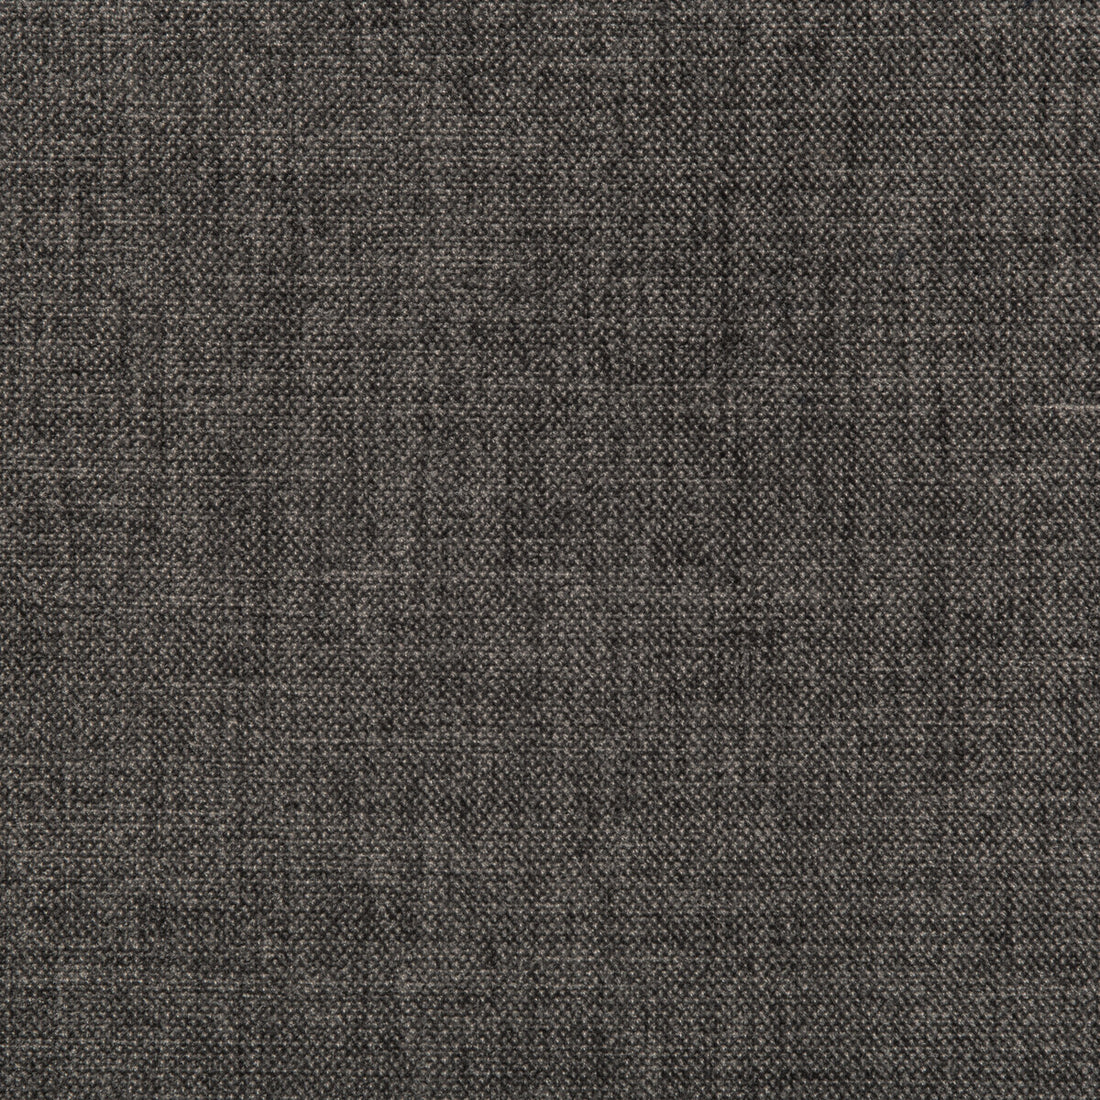 Wall fabric in metal color - pattern 30765.11.0 - by Kravet Design in the Thom Filicia collection